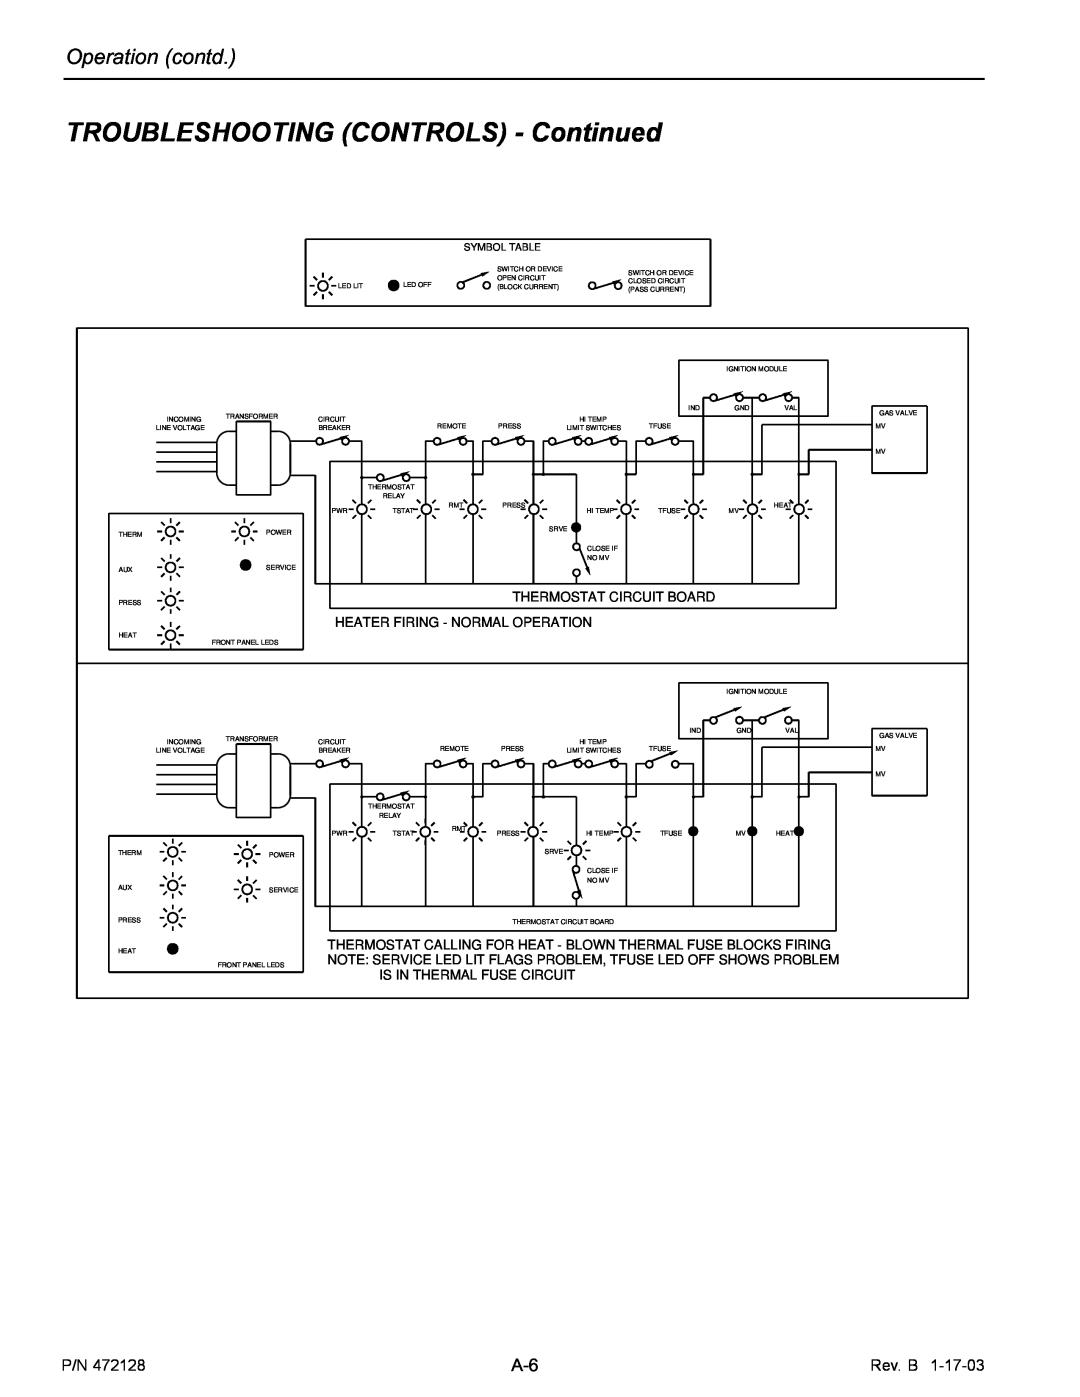 Pentair CH installation manual TROUBLESHOOTING CONTROLS - Continued, Operation contd, Rev. B, Thermostat Circuit Board 